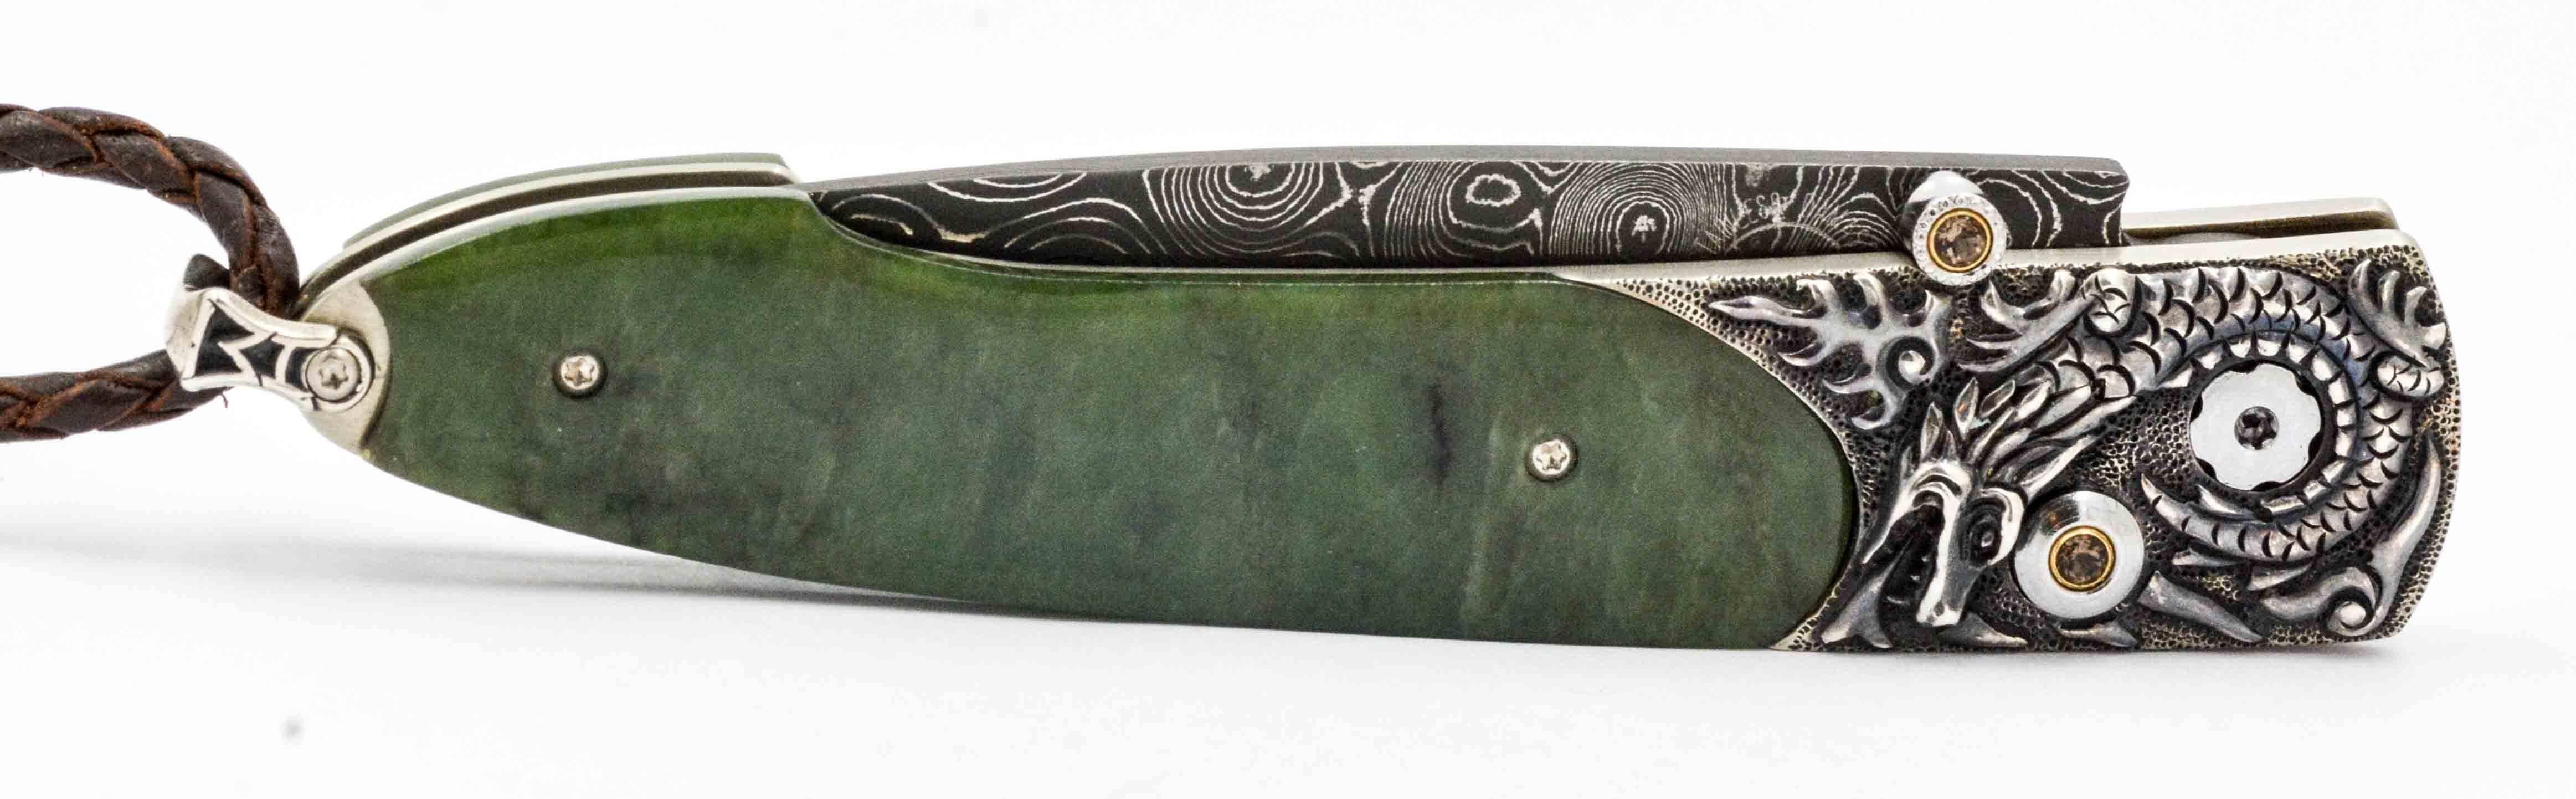 William Henry Damascus Steel Knife with Jade Handle and Smaug Carved Bolster 2